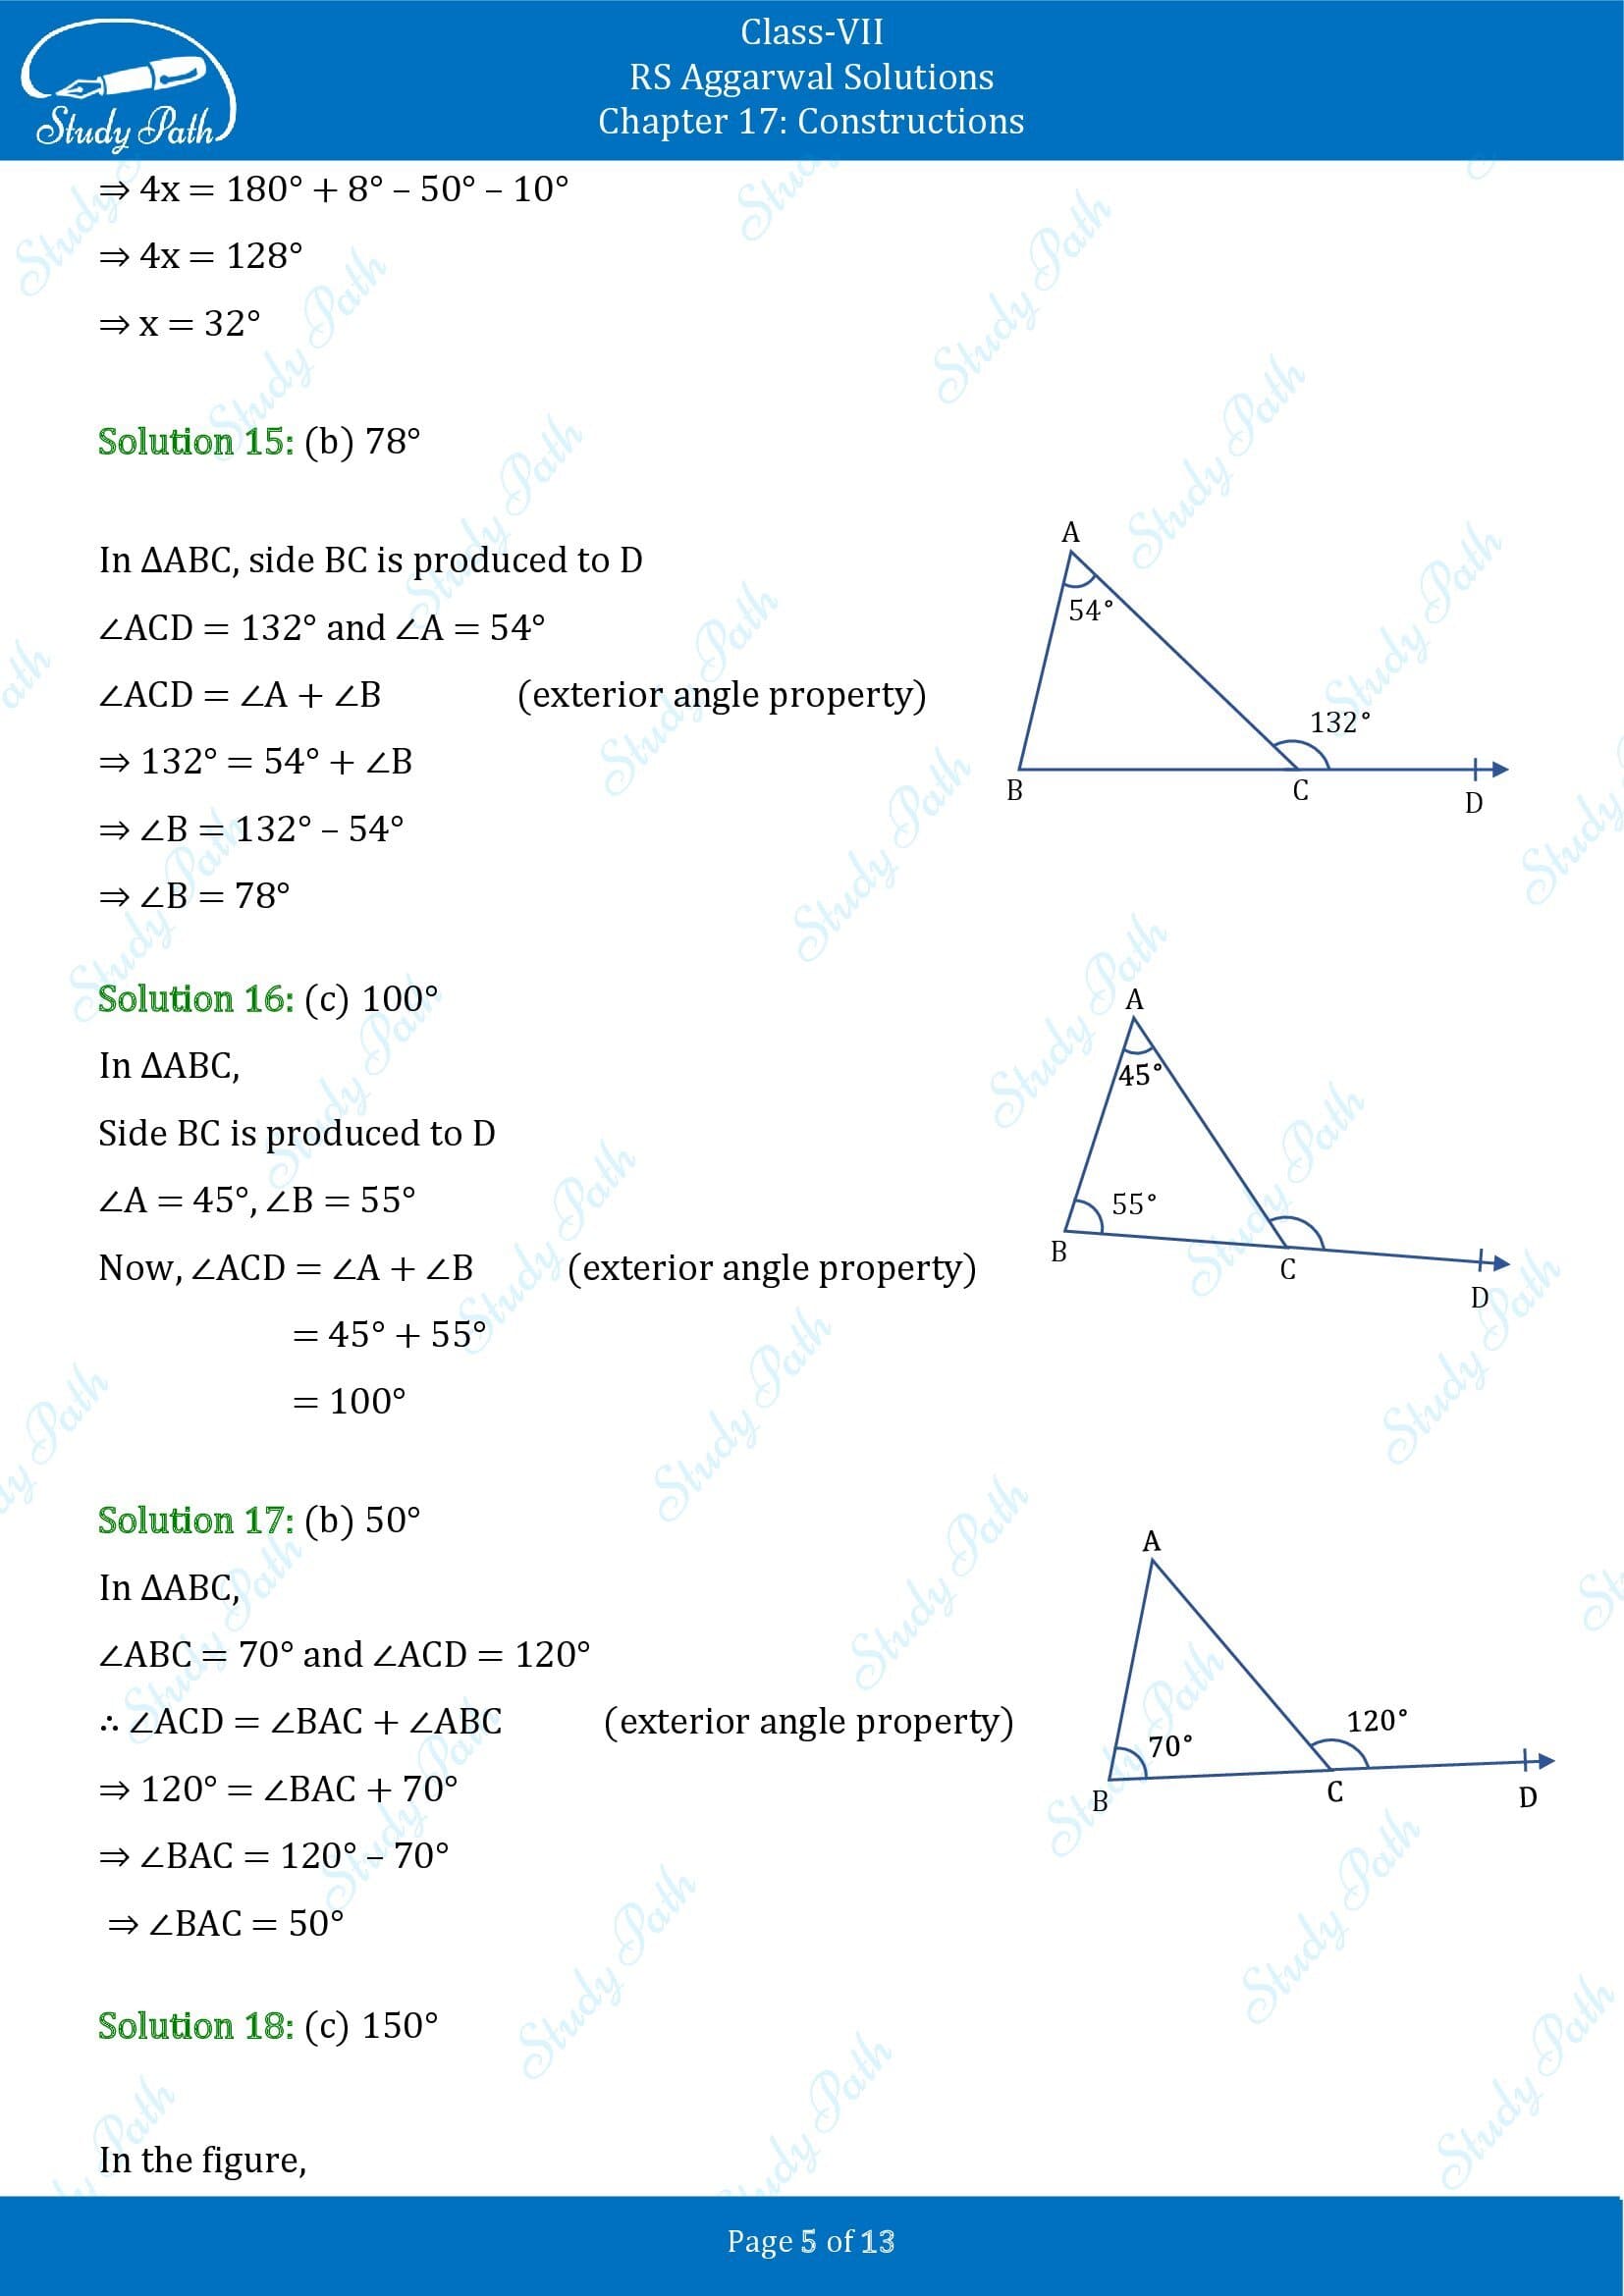 RS Aggarwal Solutions Class 7 Chapter 17 Constructions Exercise 17CMCQ 00005